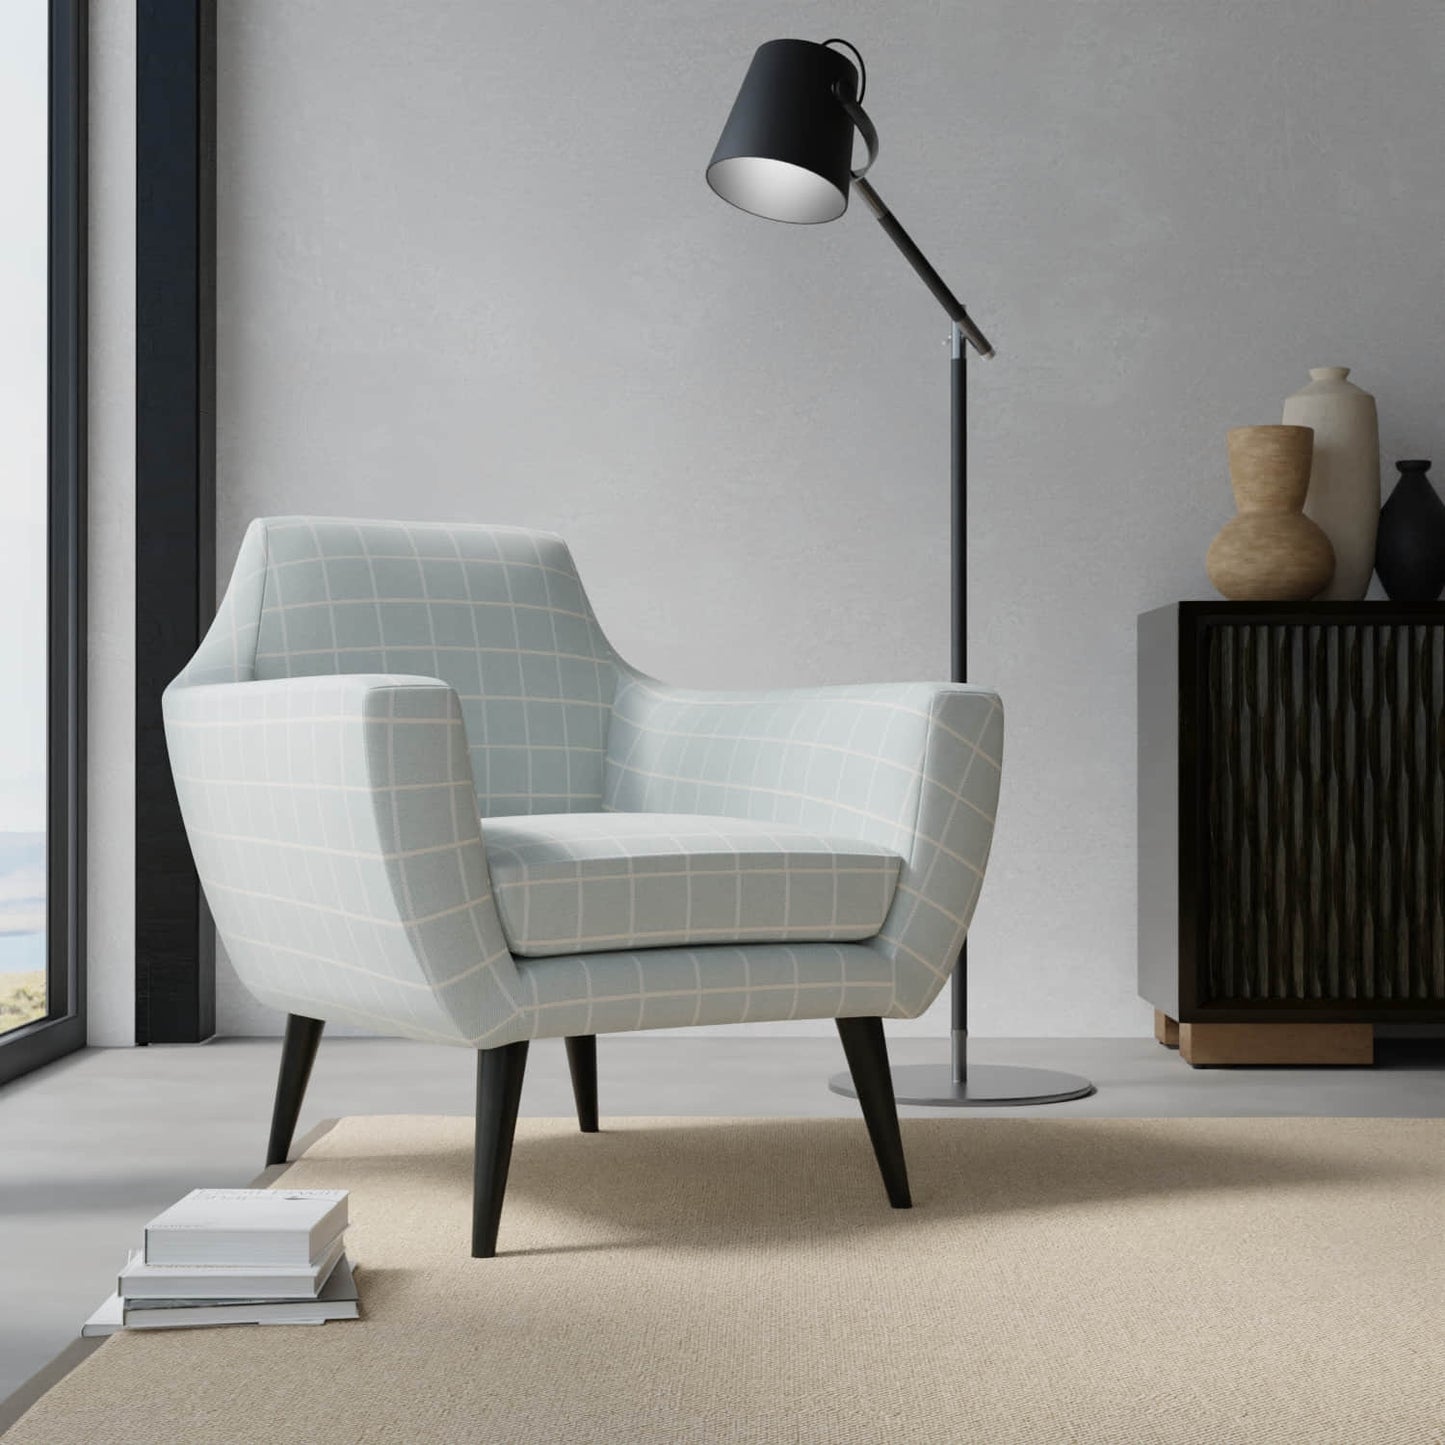 Allie Glacier upholstered on a contemporary chair